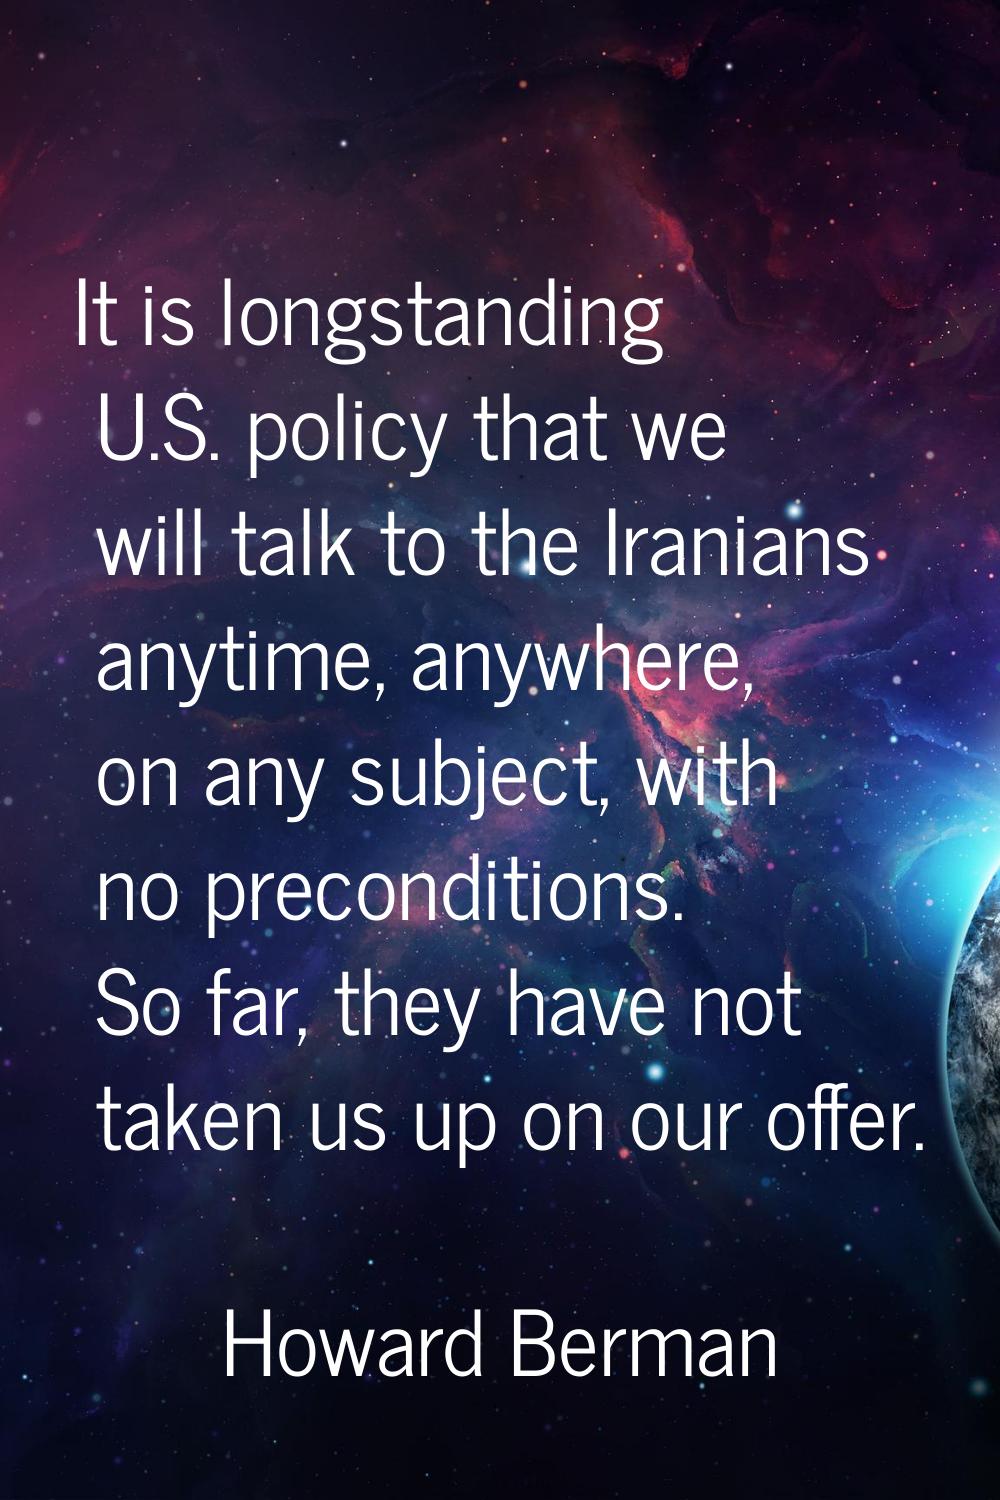 It is longstanding U.S. policy that we will talk to the Iranians anytime, anywhere, on any subject,